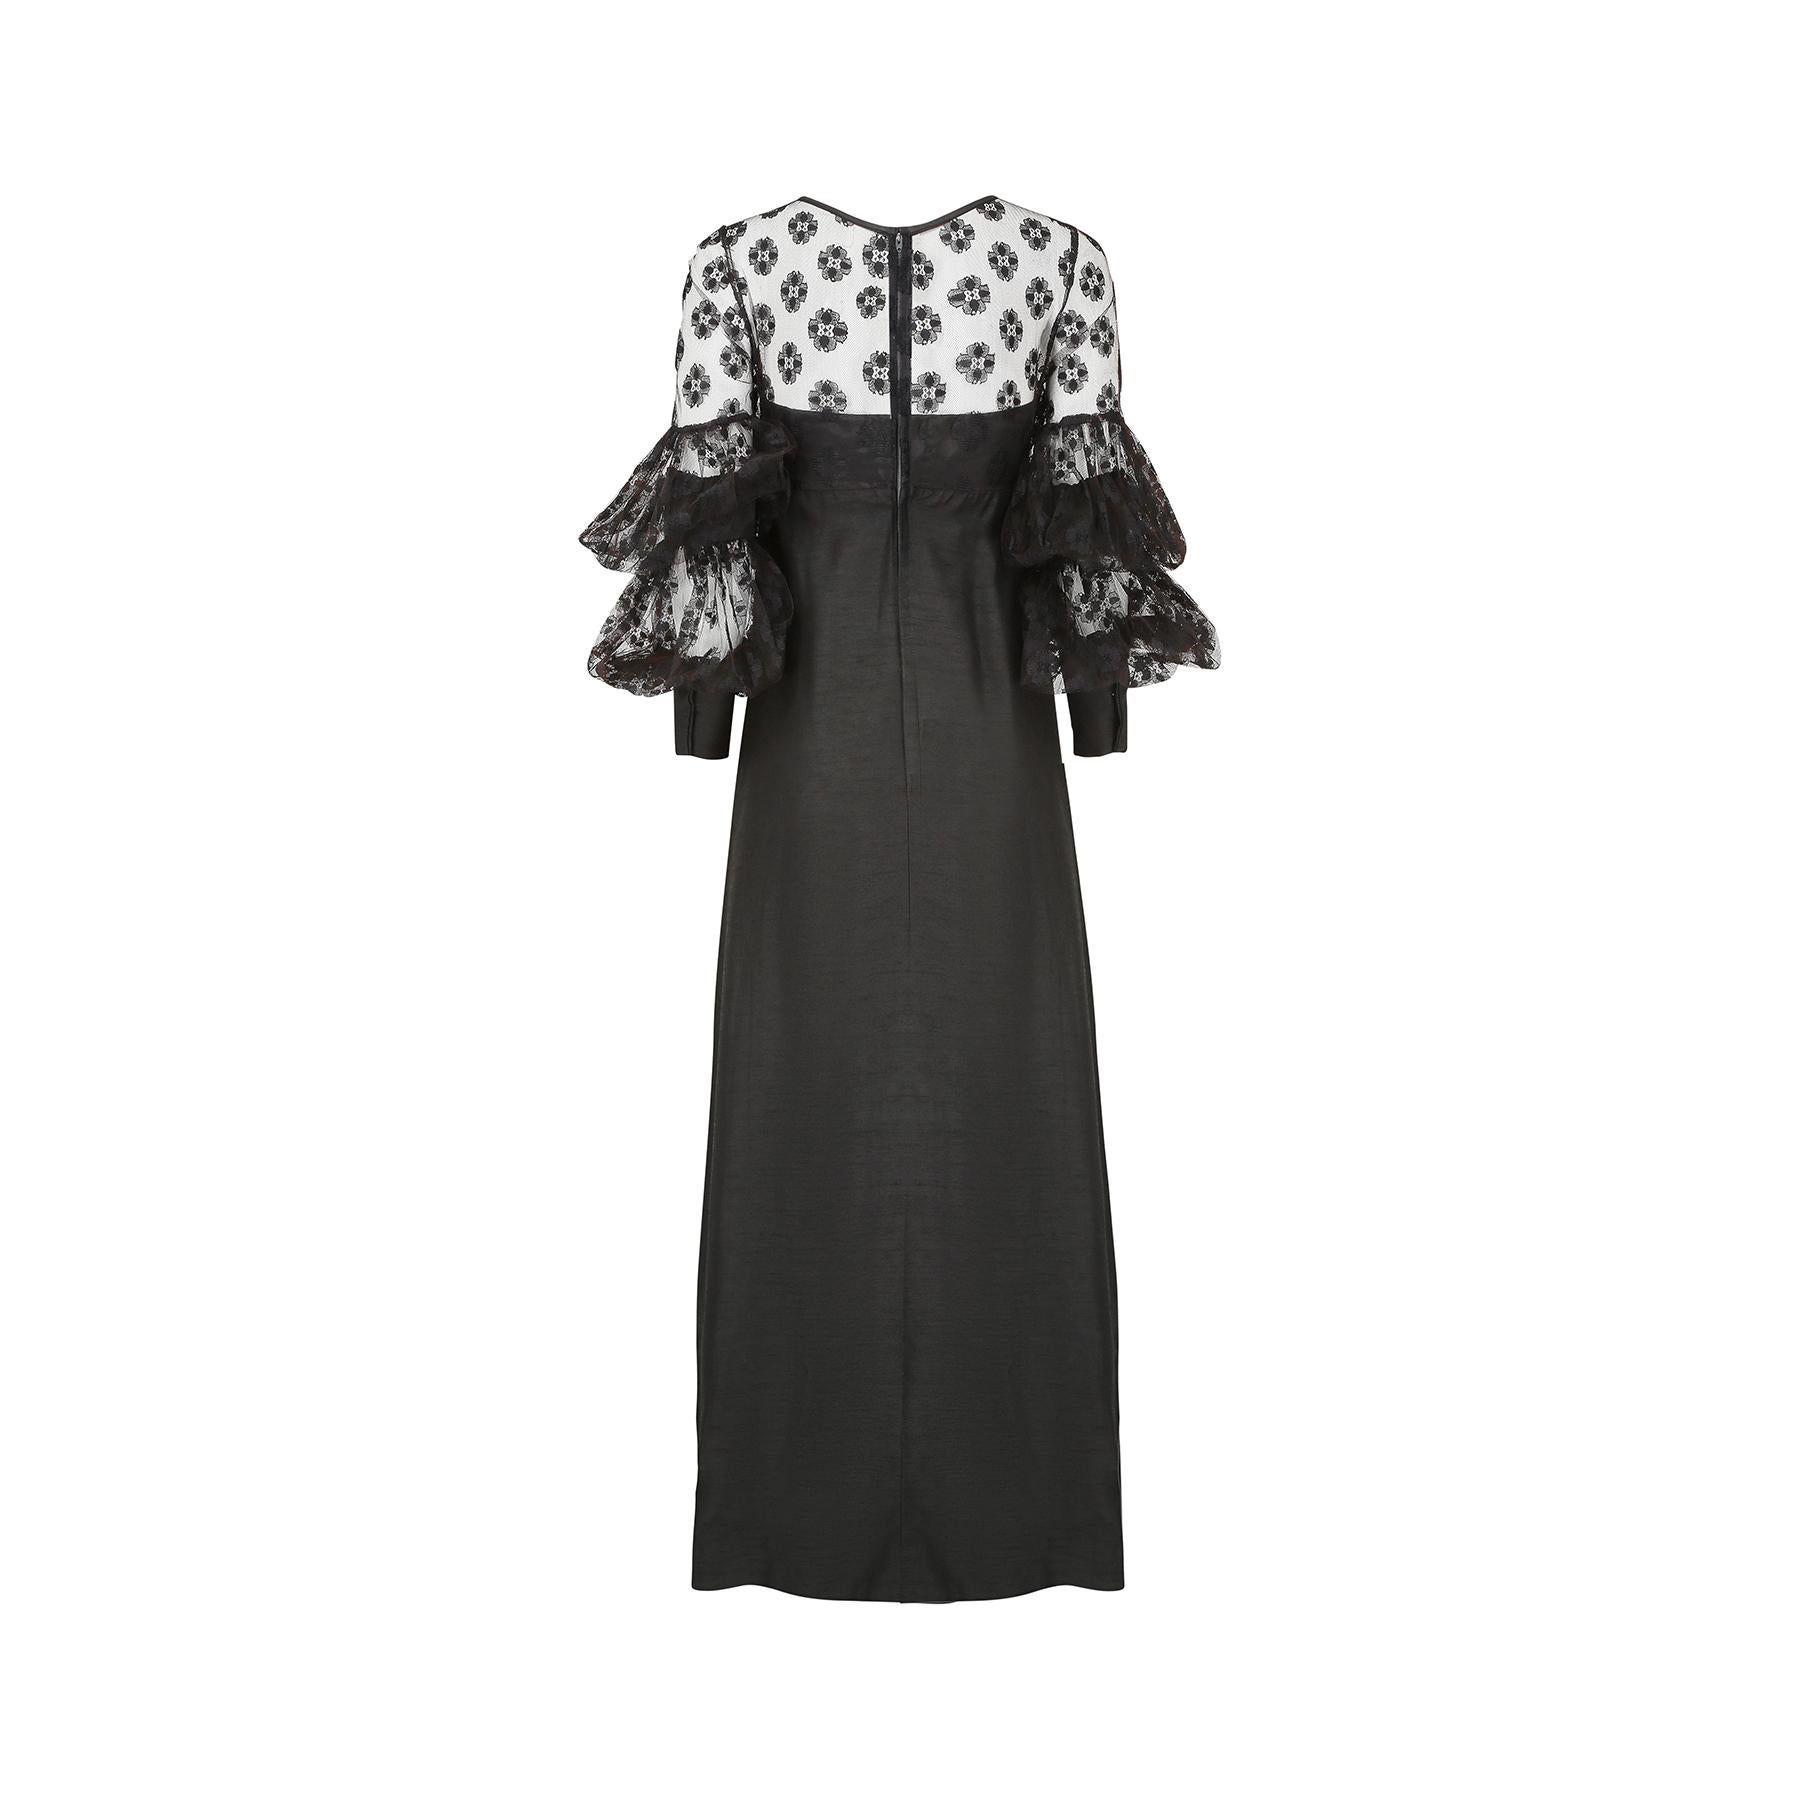 A very striking Jean Varon black lace maxi dress which dates from the late 1960s with a dramatic sleeve design that has not one but two lace balloon sections and an elongated cuff.  The lacework is an abstract floral design reminiscent of the flower